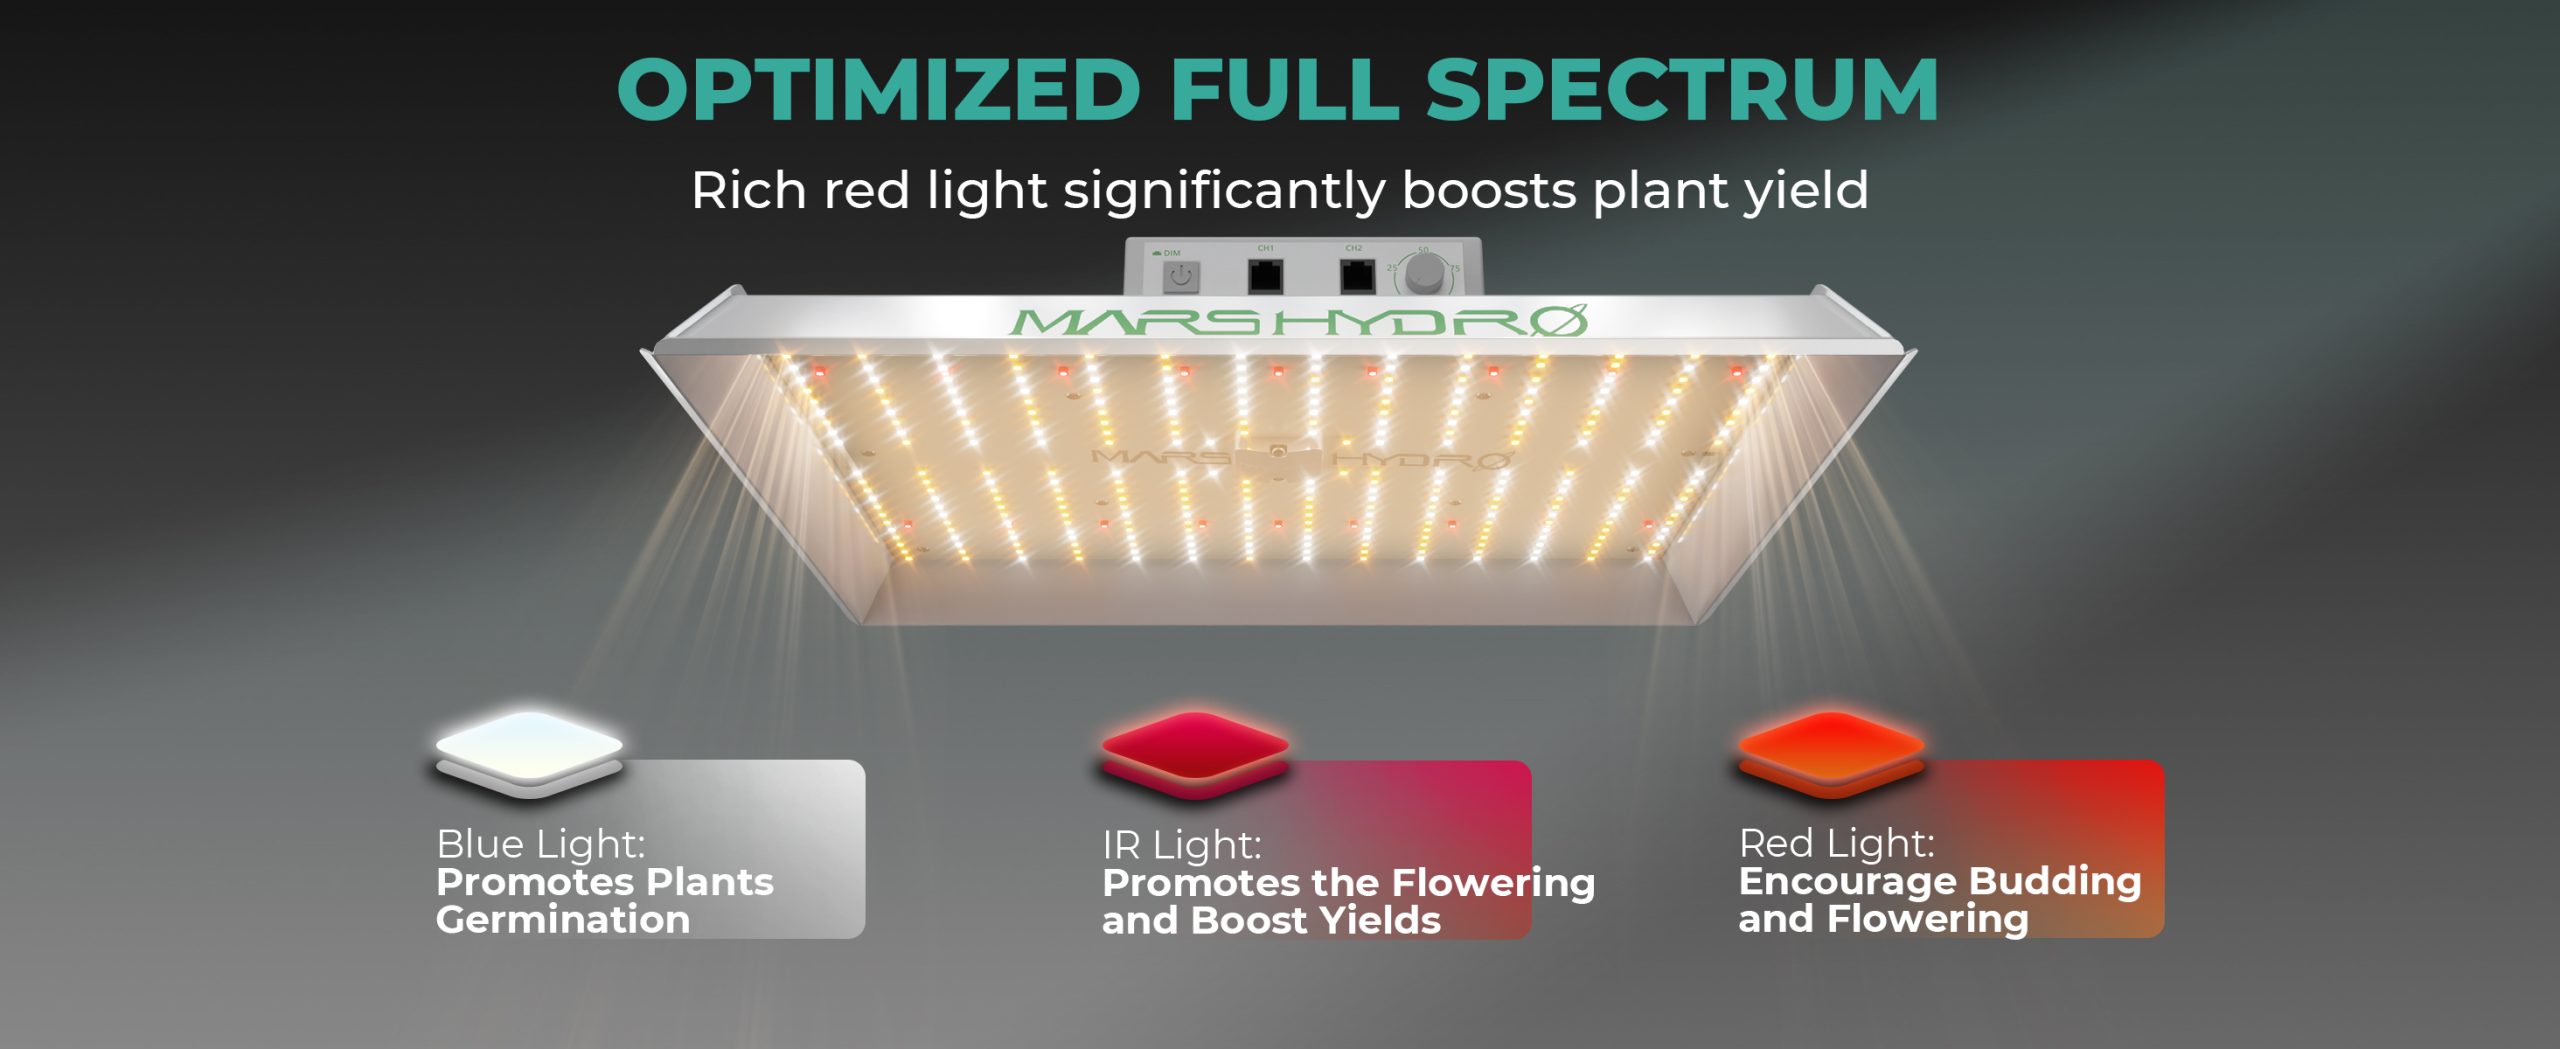 Mars-Hydro-TS1000-OPTIMIZED-FULL-SPECTRUM-Rich-red-light-significantly-boosts-plant-yield-scaled.jpg